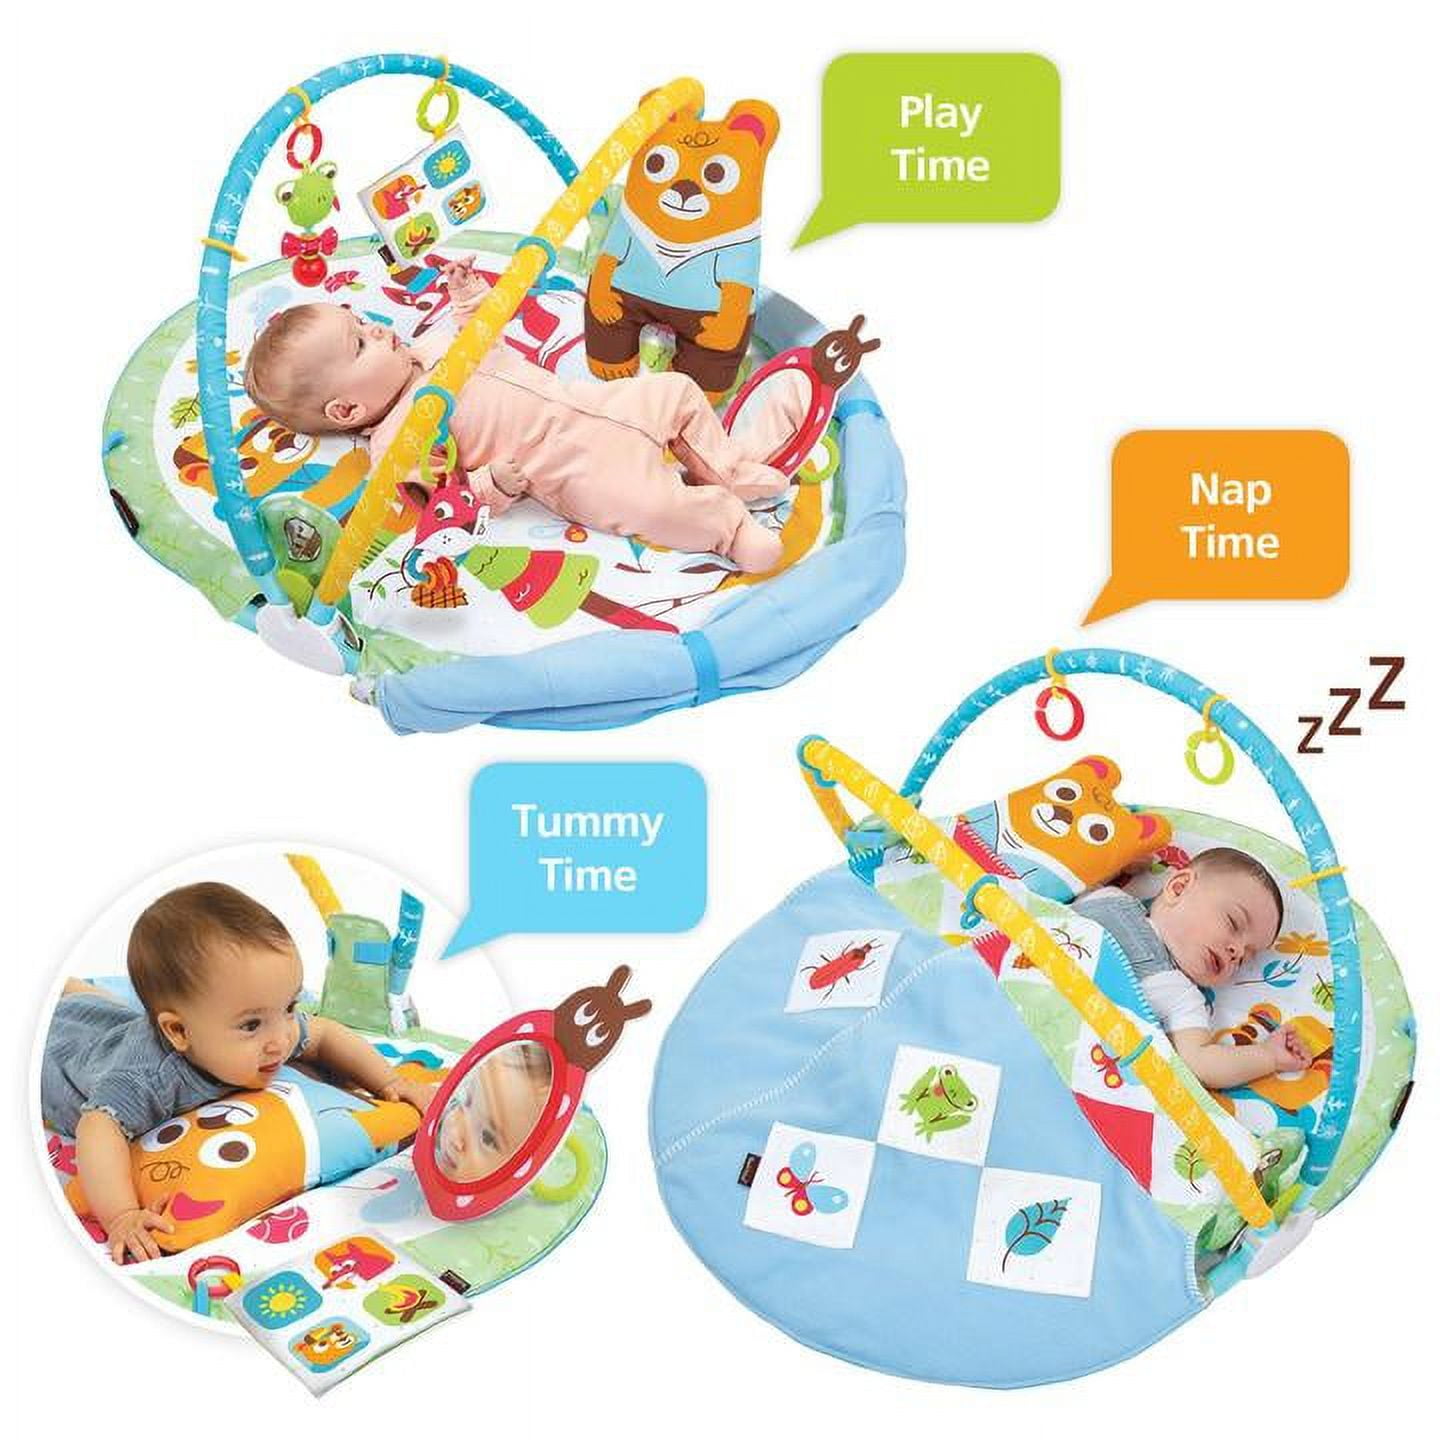 Inex Life Soft Foam Baby Play Mat (0.4 inch Thick) , Perfect Playmat for Tummy Time & Crawling - Thick Padded Tiles Protect Infants & Toddlers from